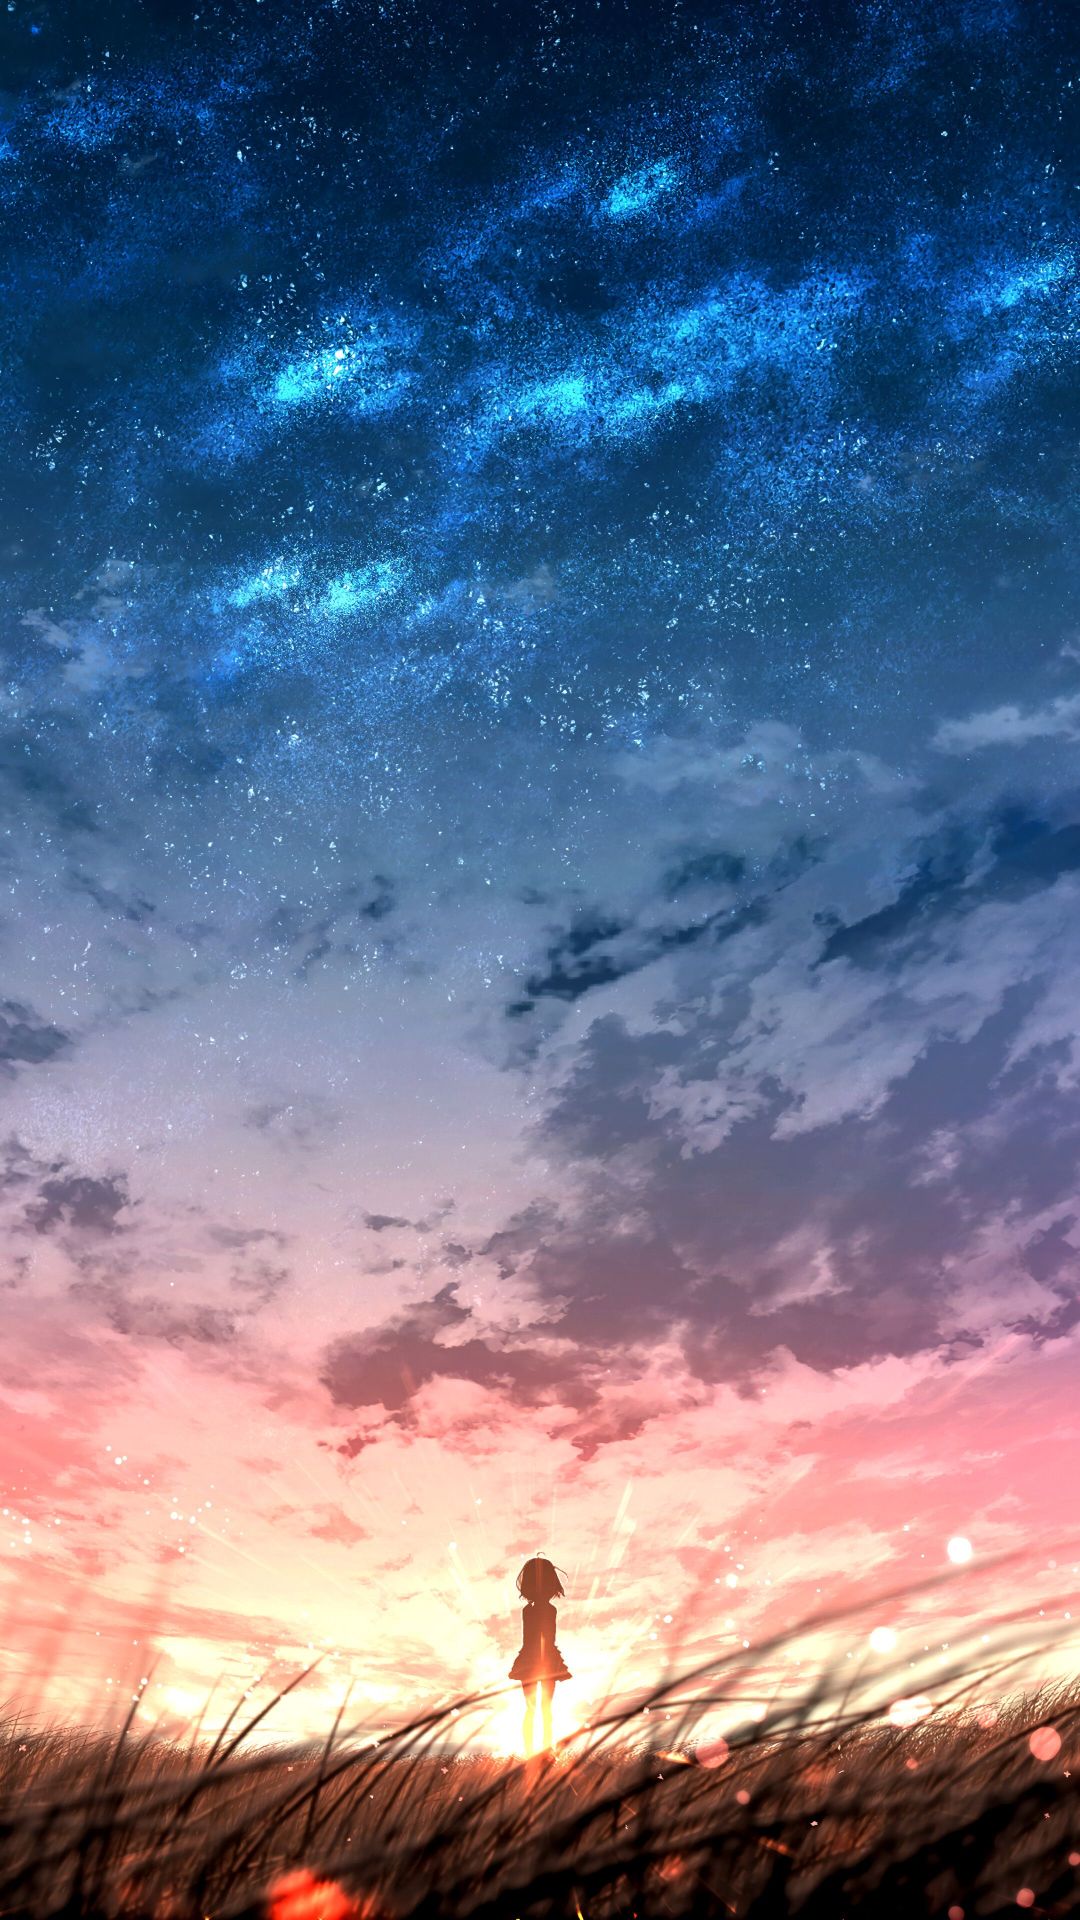 Aesthetic Anime 4k Wallpapers - Top Ultra 4k Aesthetic Anime Backgrounds  Download